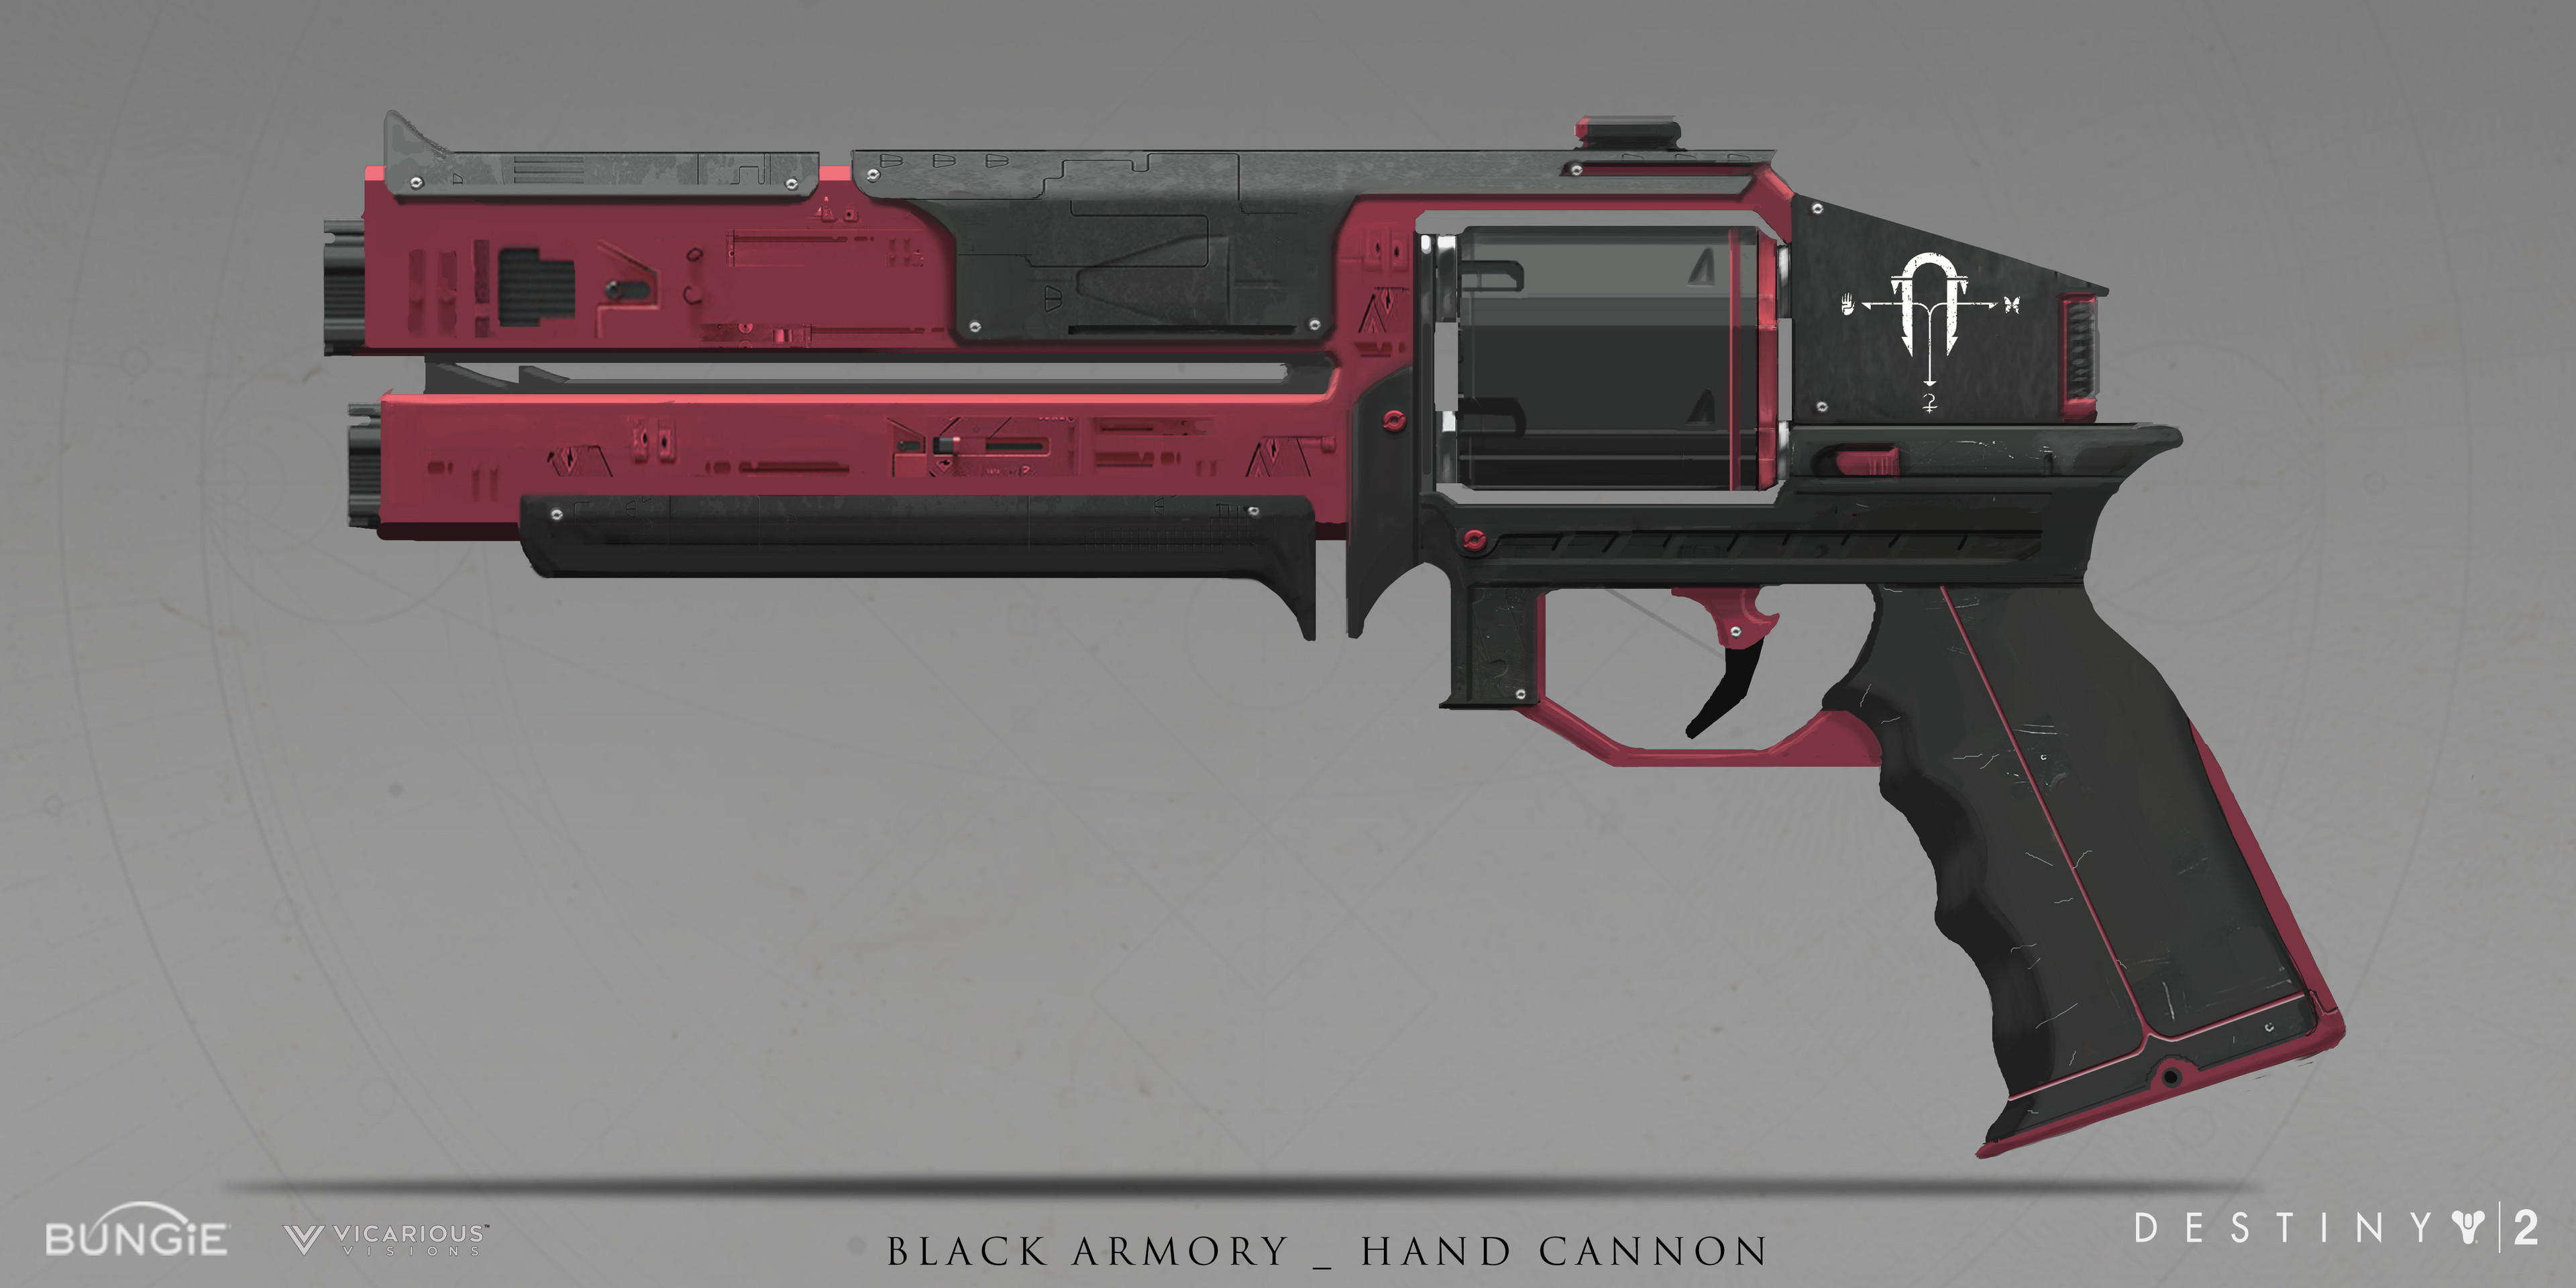 Kindled Orchid: 
Weapon design for Destiny 2 Black Armory DLC